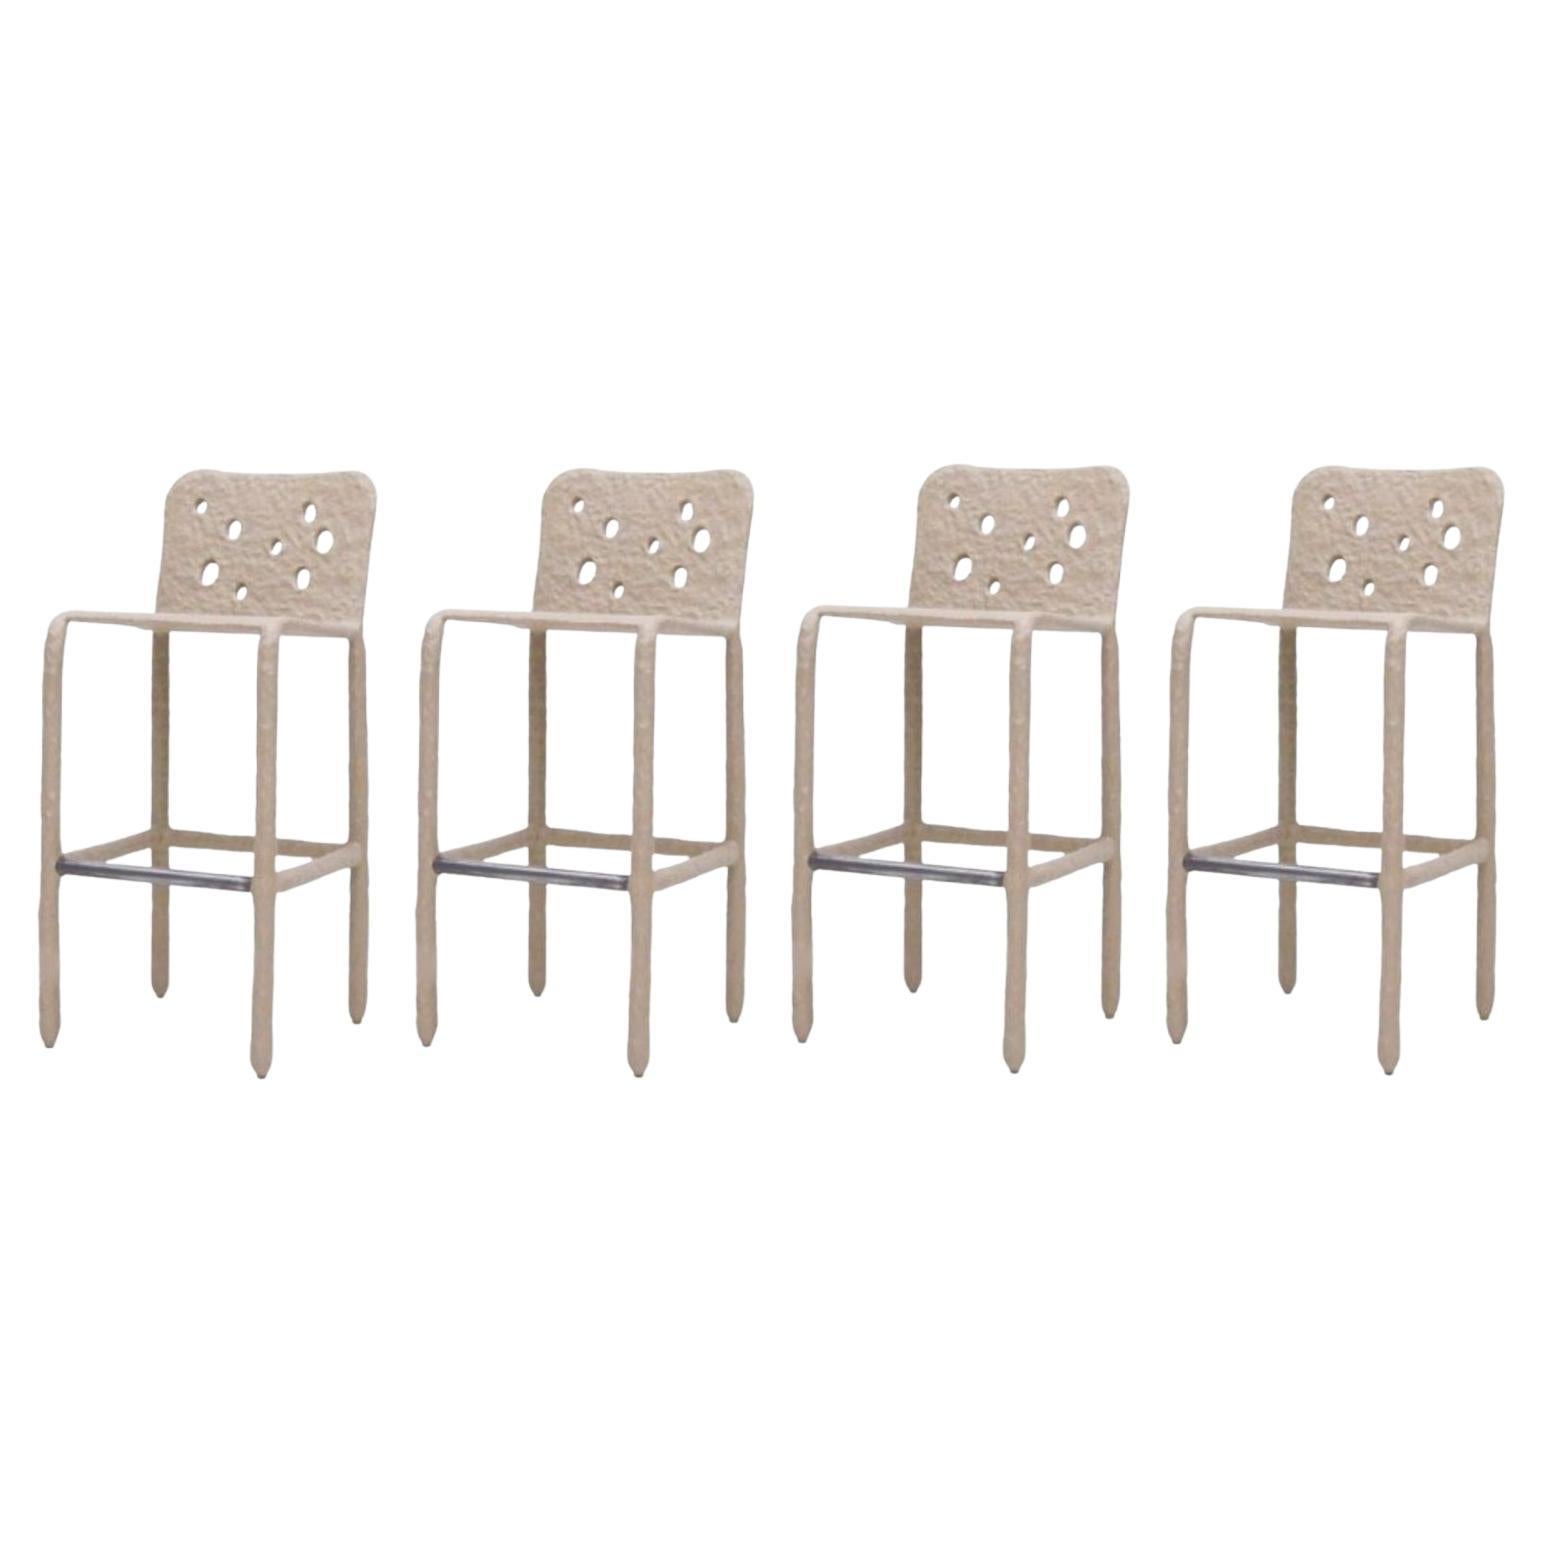 Set of 4 Outdoor Beige Sculpted Contemporary Chairs by Faina For Sale